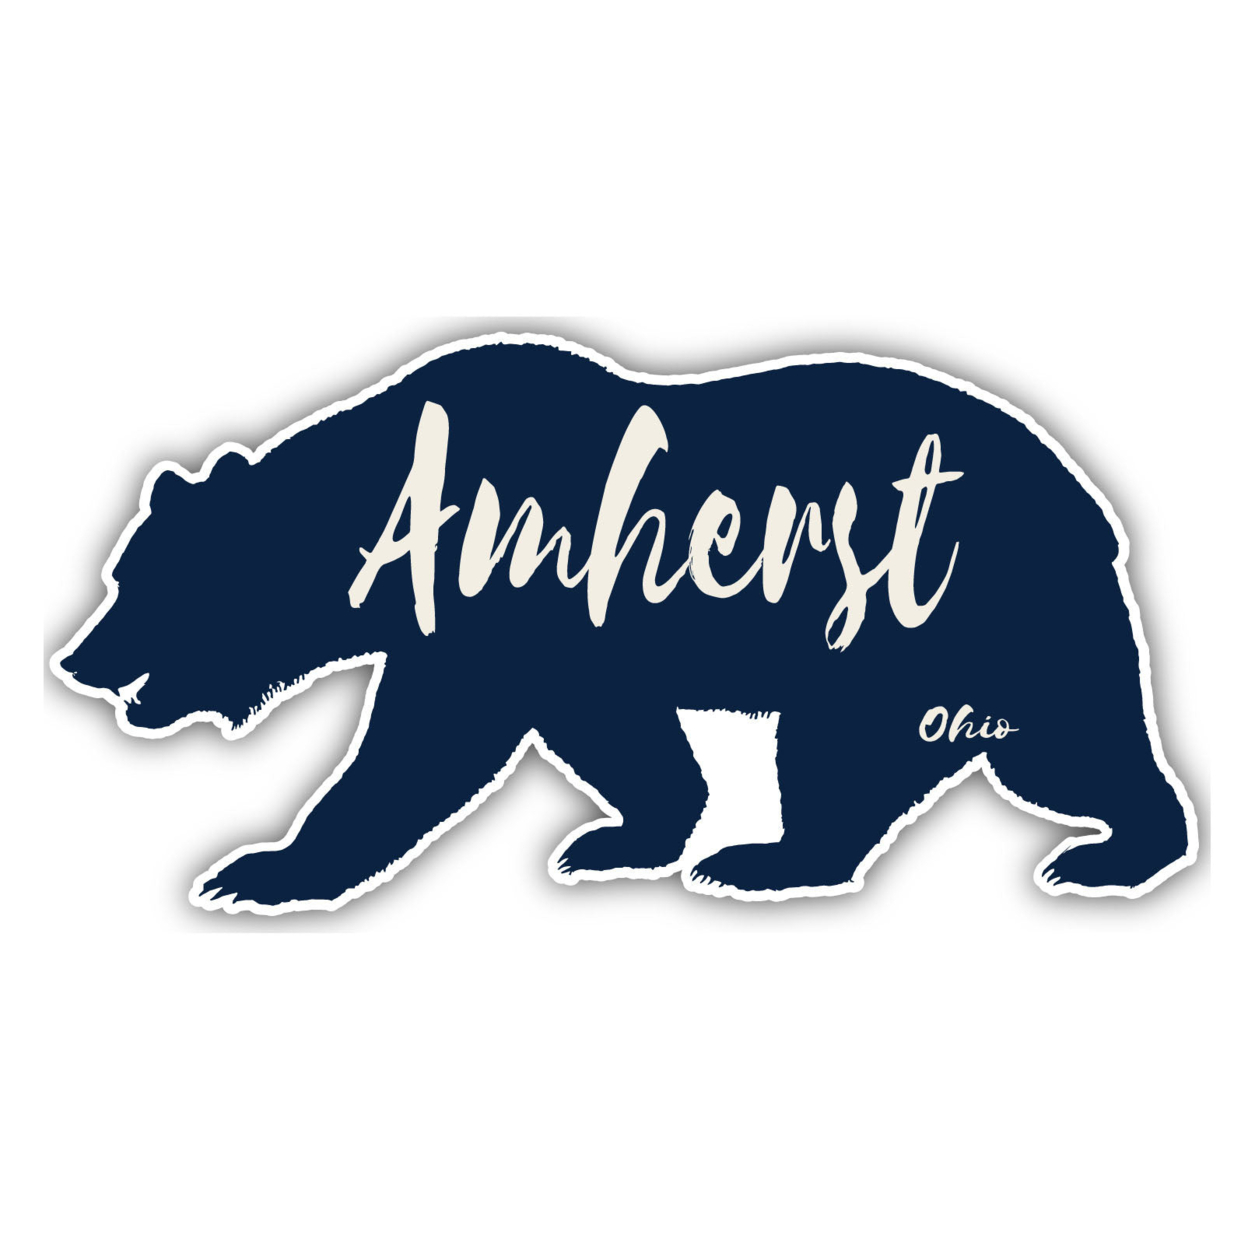 Amherst Ohio Souvenir Decorative Stickers (Choose Theme And Size) - 4-Pack, 4-Inch, Bear